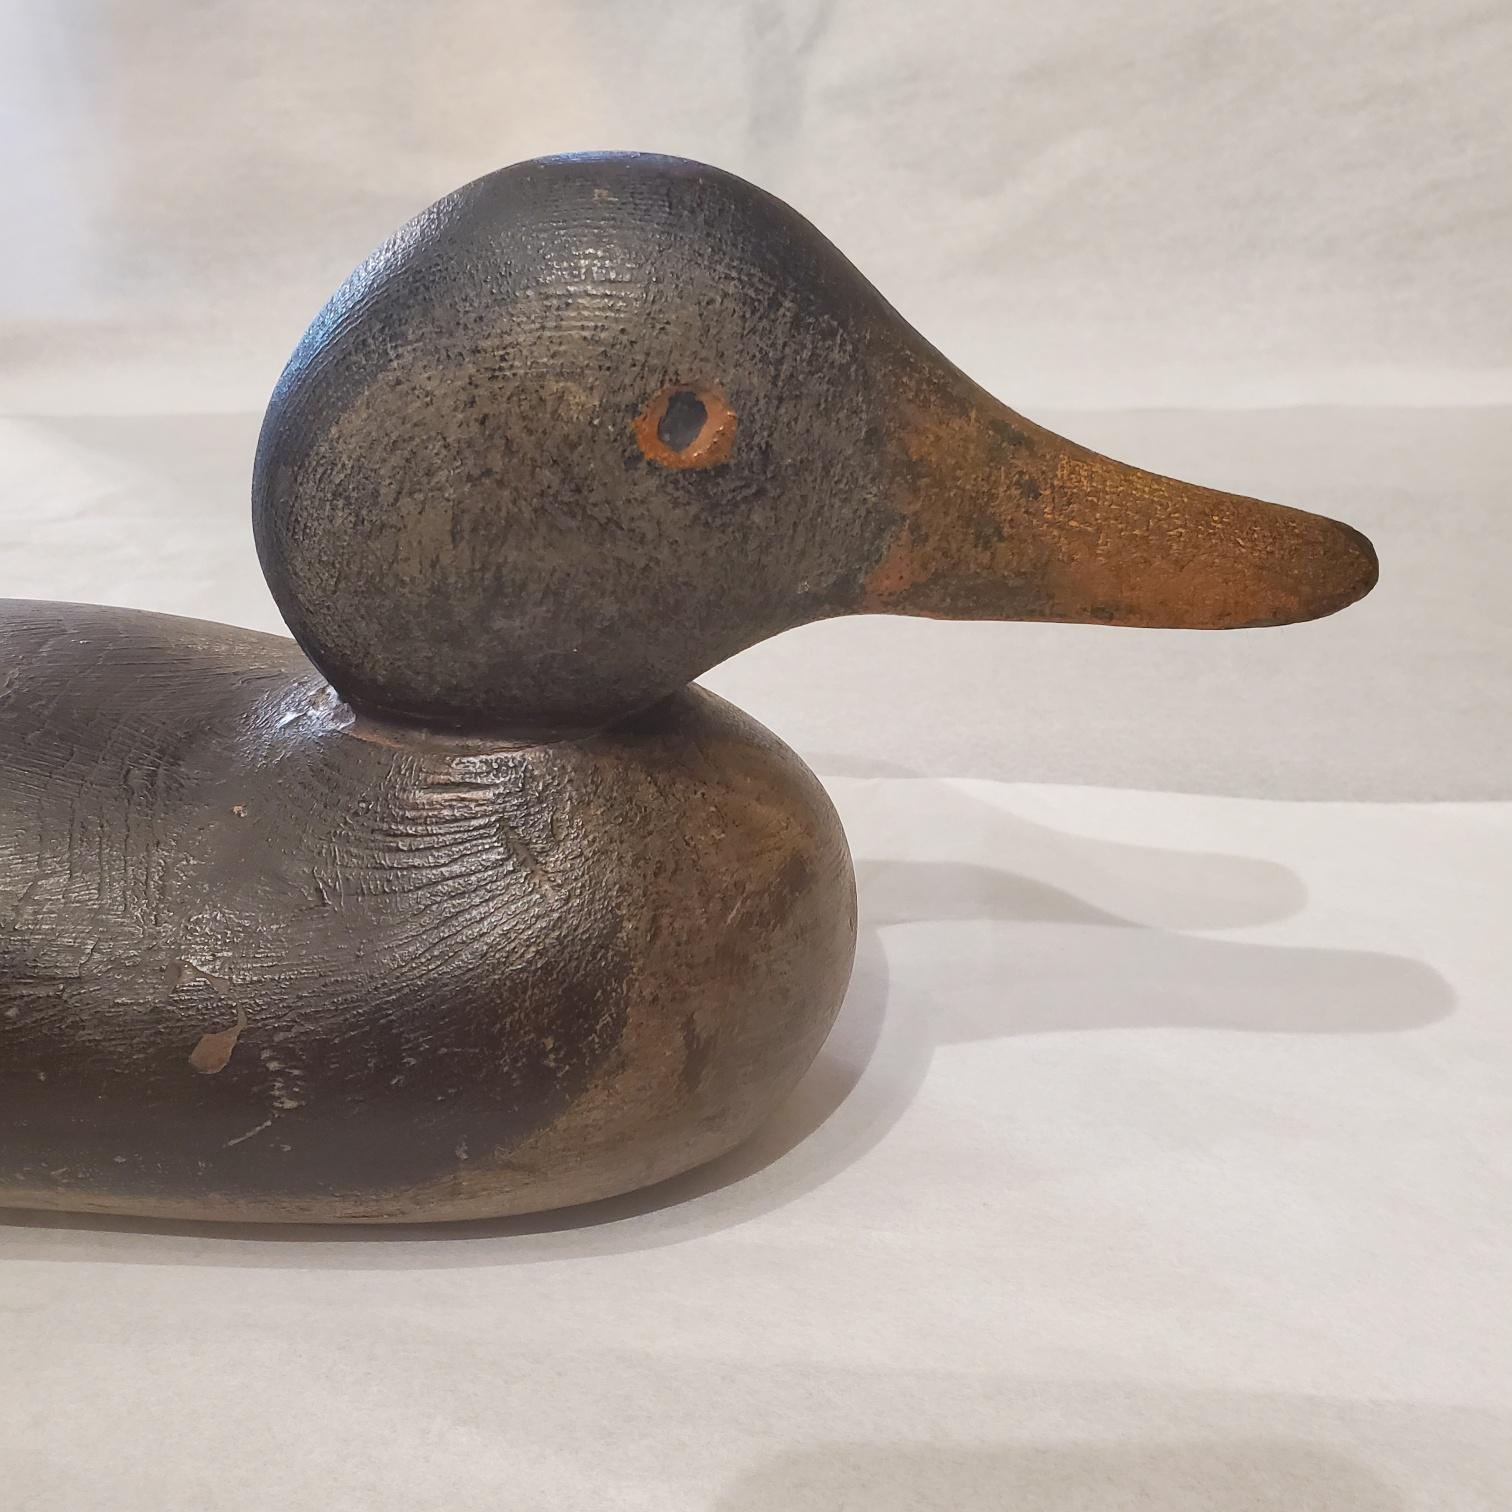 Antique Mason Standard Grade Painted Eye Mallard Hen Decoy, circa 1910, having head with carved and painted eyes, attached to solid carved body with slightly protruding breast. In mostly original paint with I think some old touch-up to the black